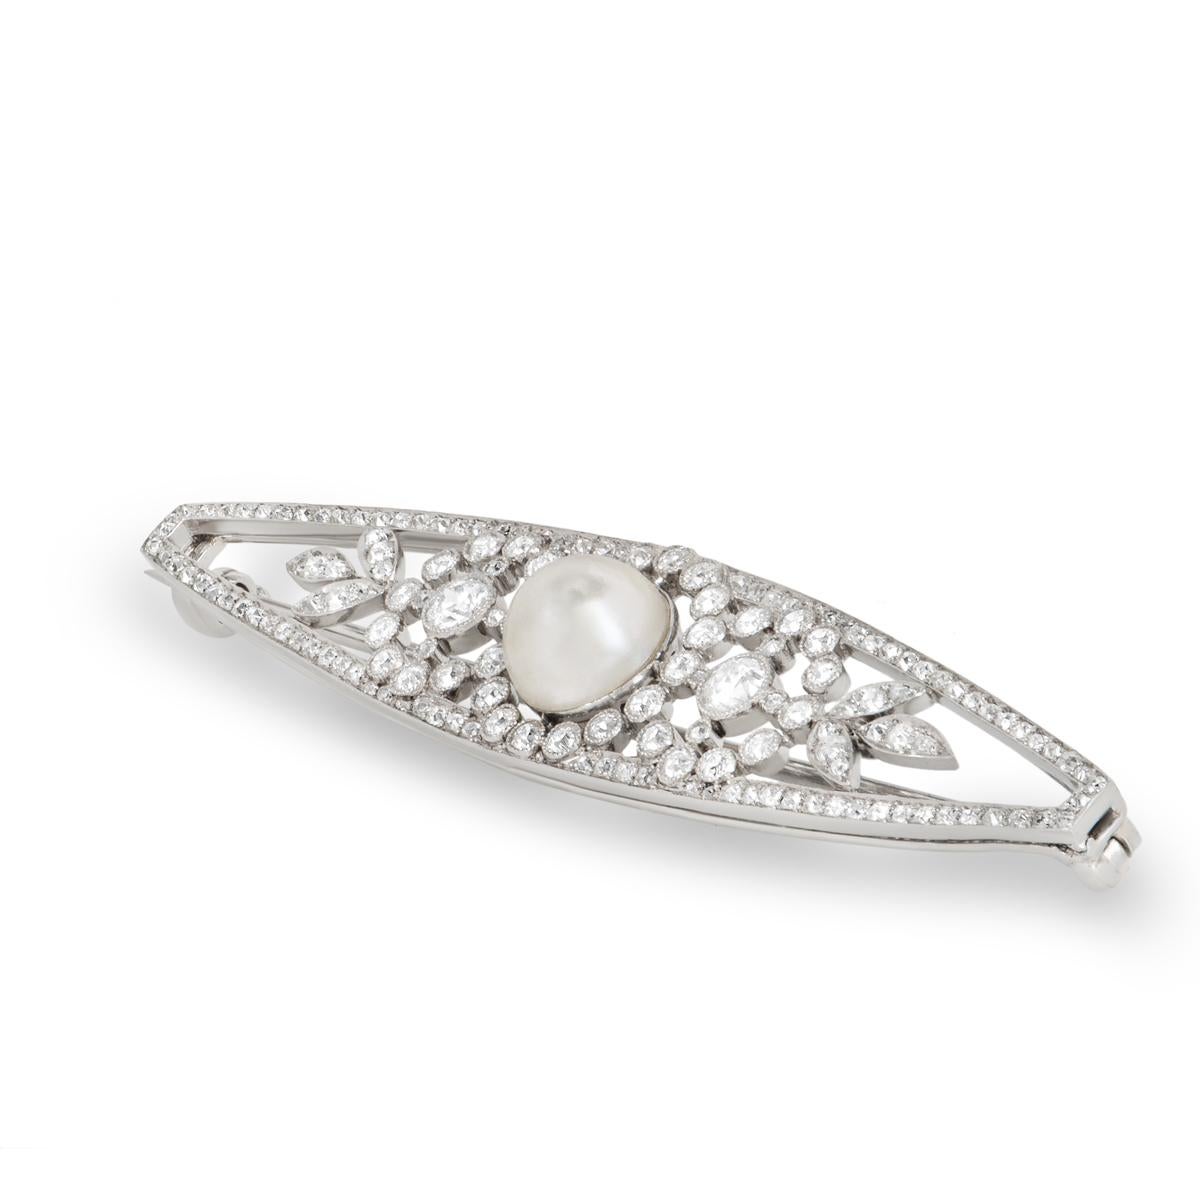 Art Deco Vintage Art Dec Diamond and Pearl Brooch in Platinum 1.75 Carats For Sale